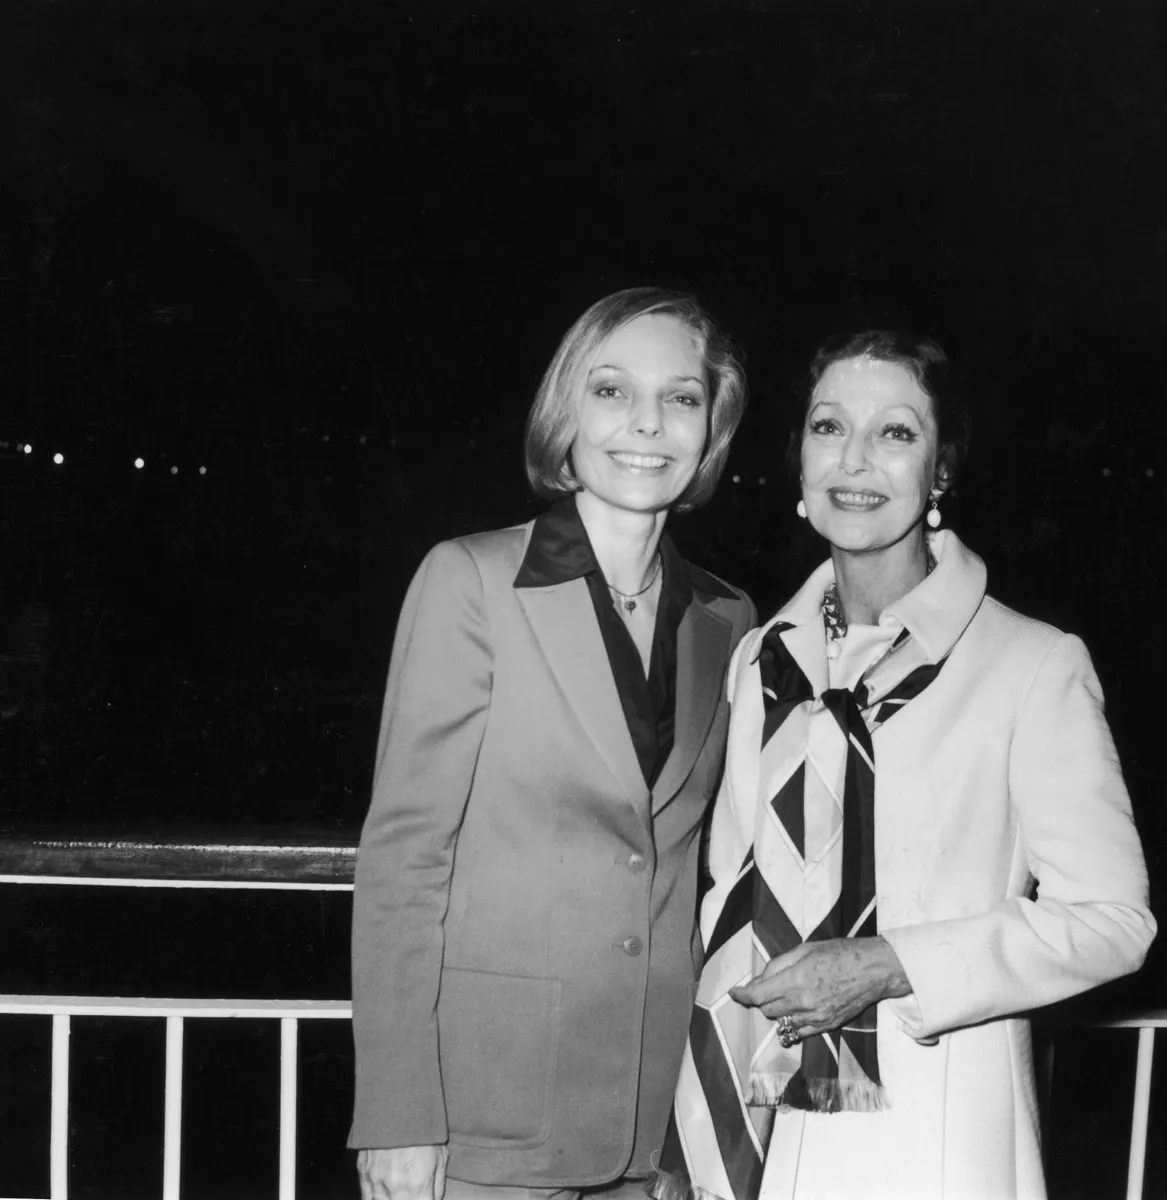 Judy Lewis and Loretta Young in 1978